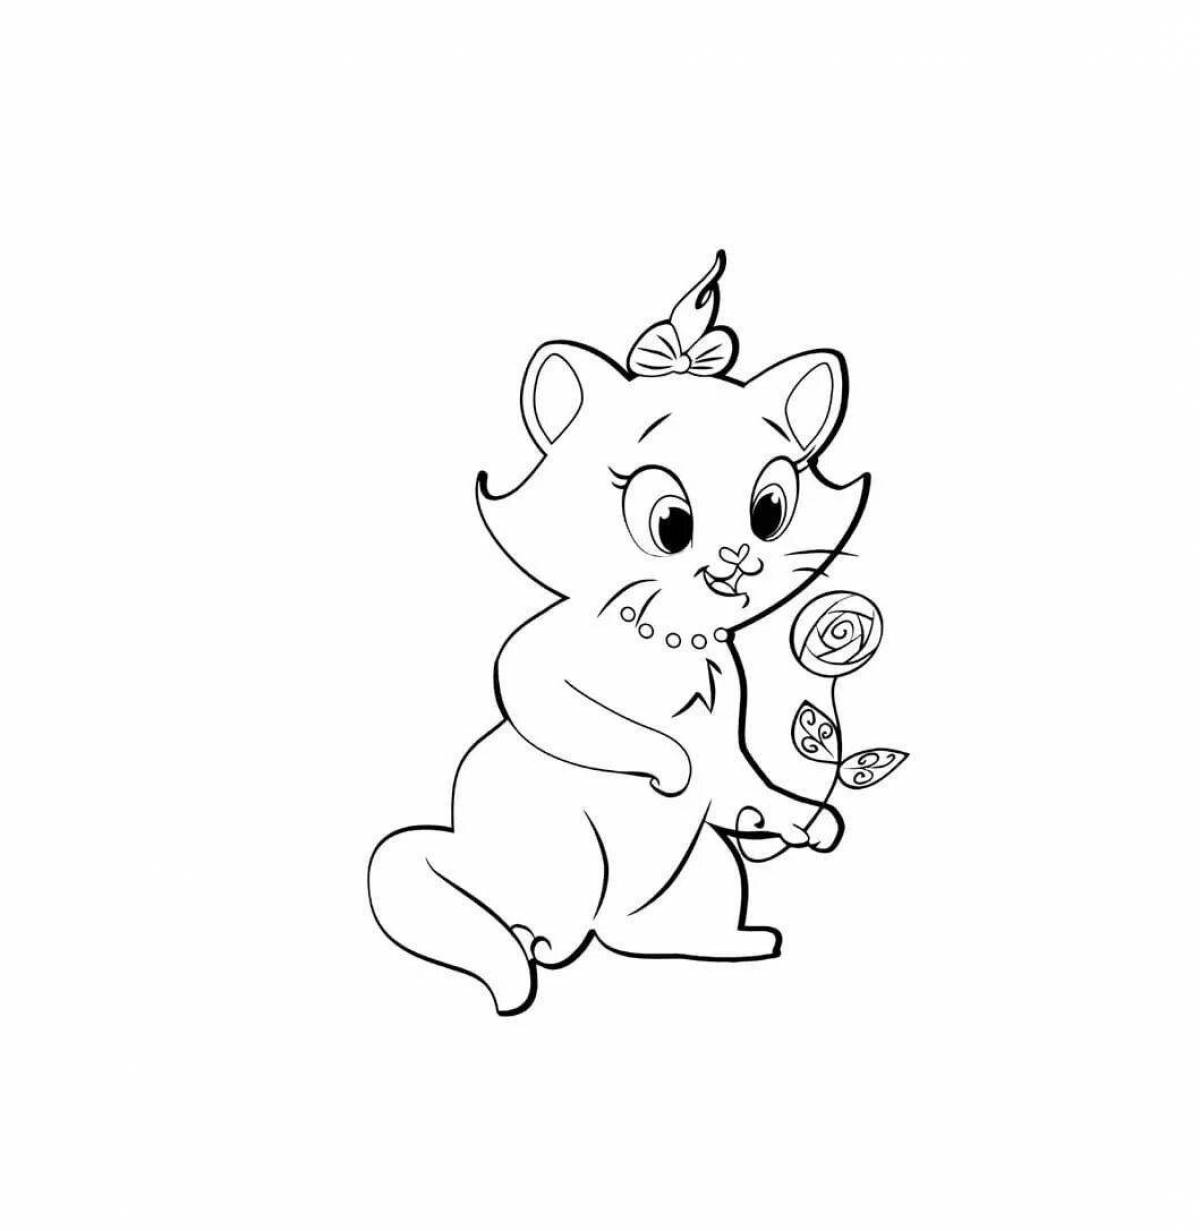 Animated cat lily coloring page